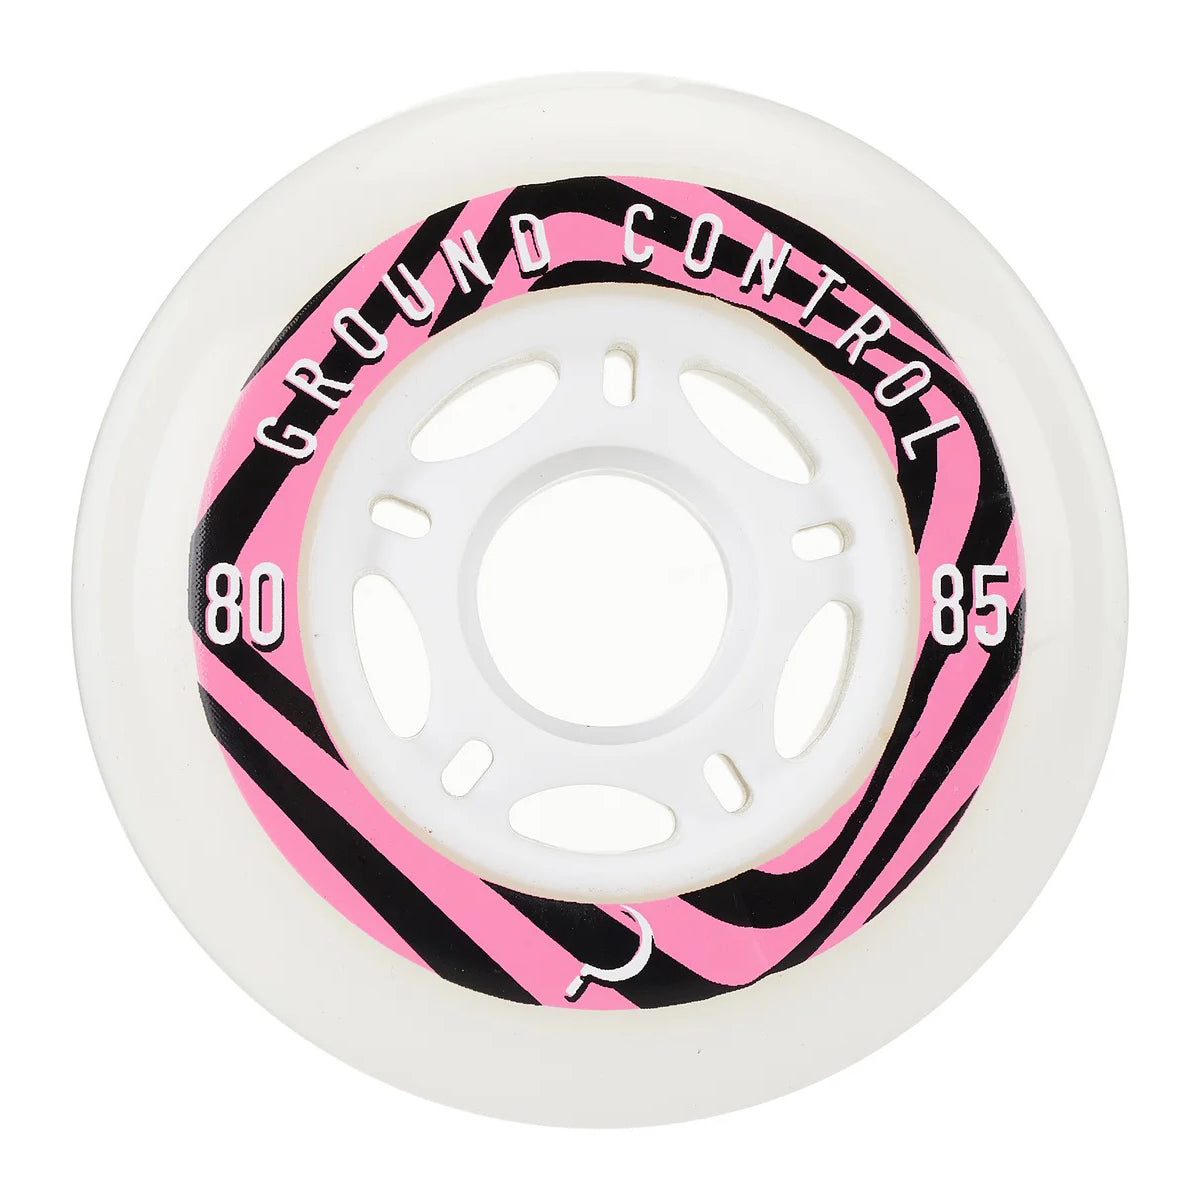 Ground Control Psych Wheel 80mm 85a (4 Pack)